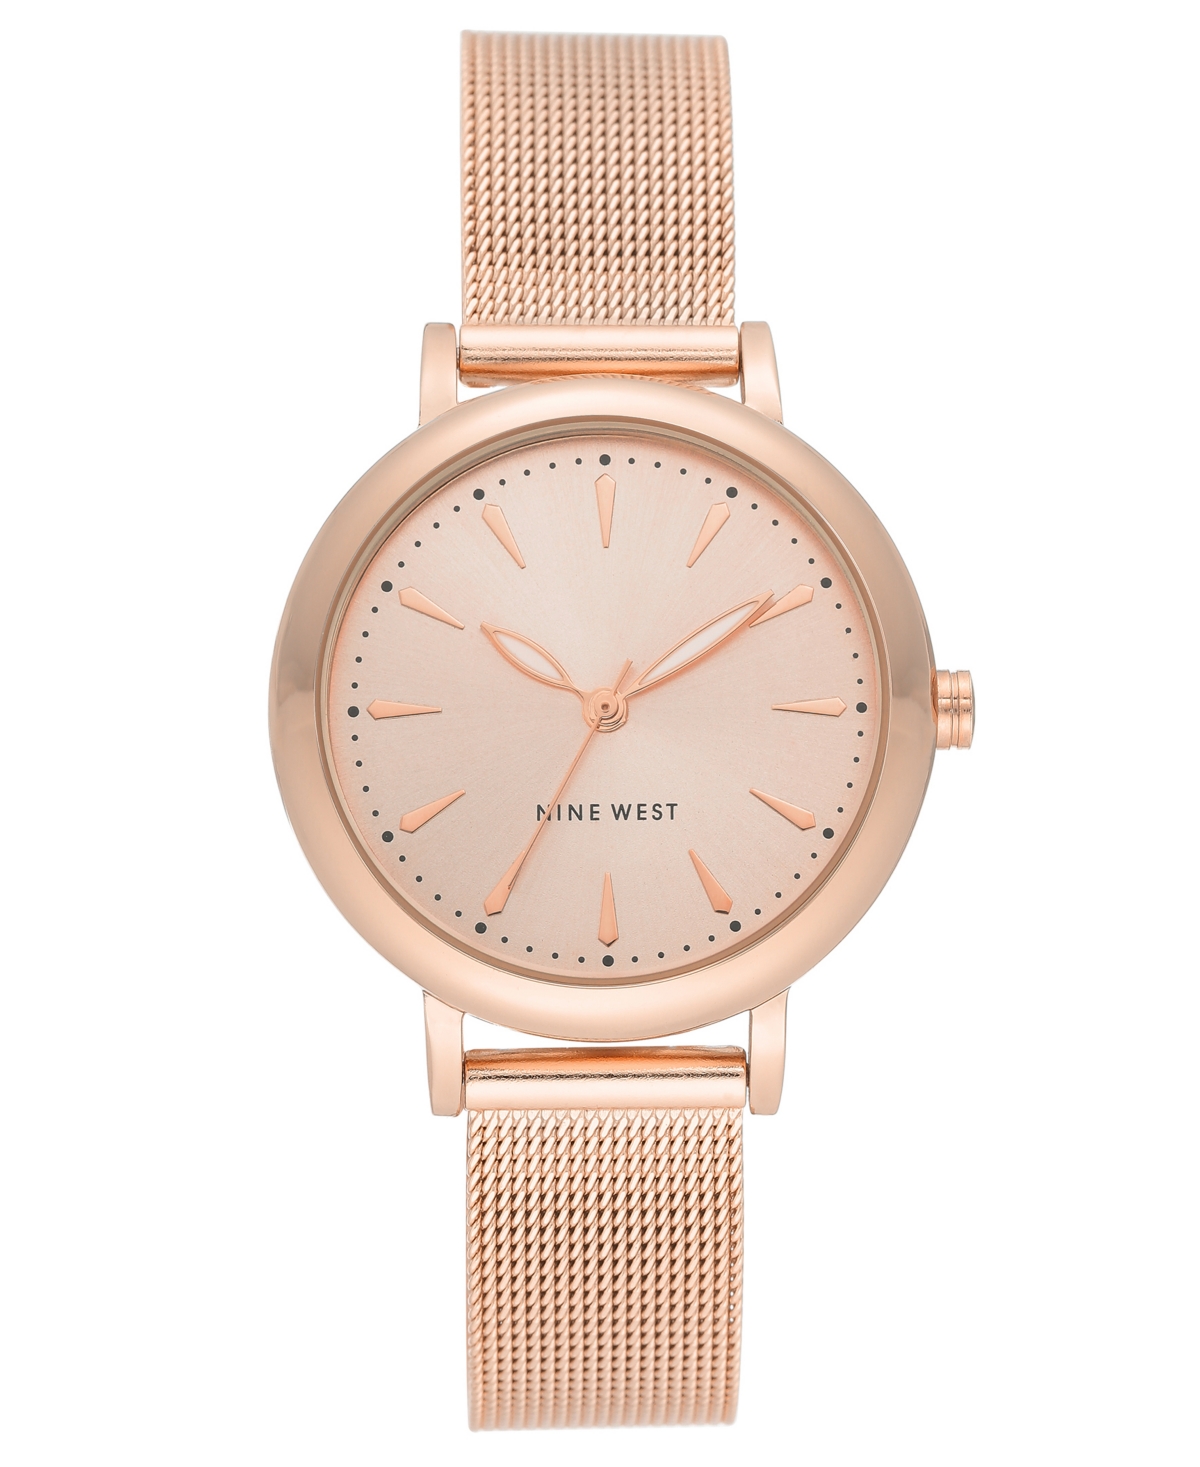 Nine West Women's Quartz Rose Gold-tone Stainless Steel Mesh Band Watch, 33mm